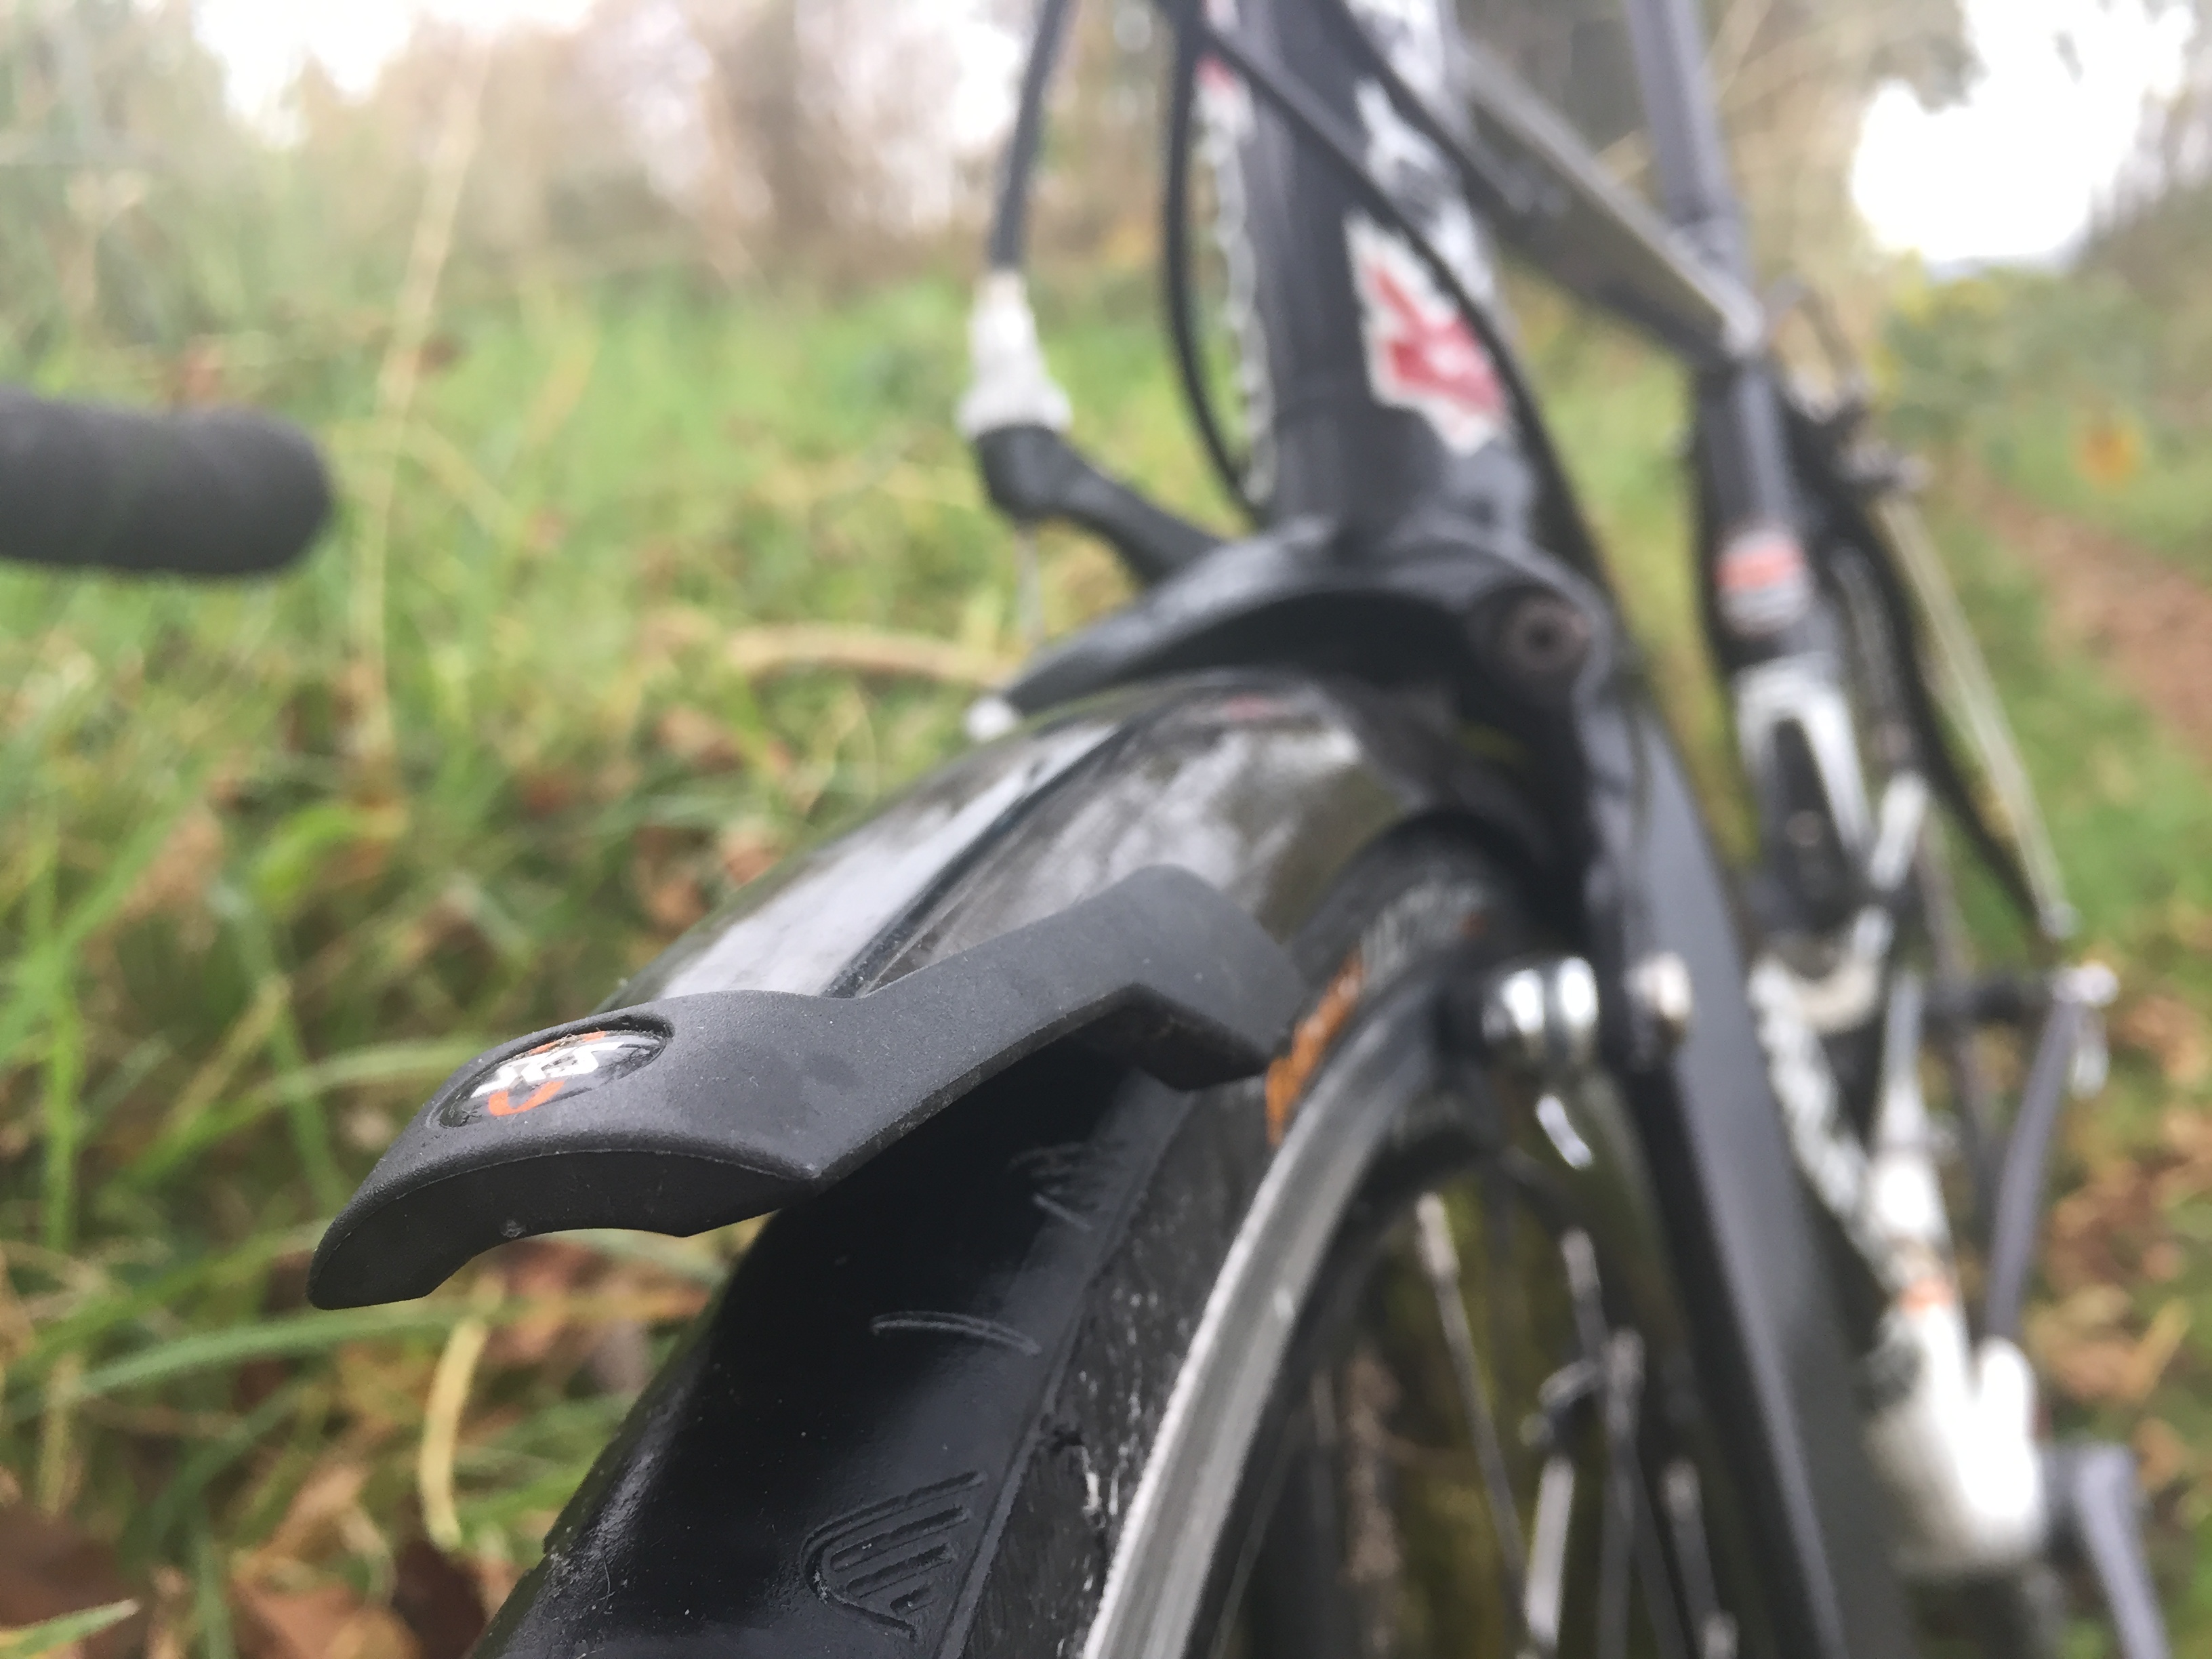 sks mudguards fitting instructions